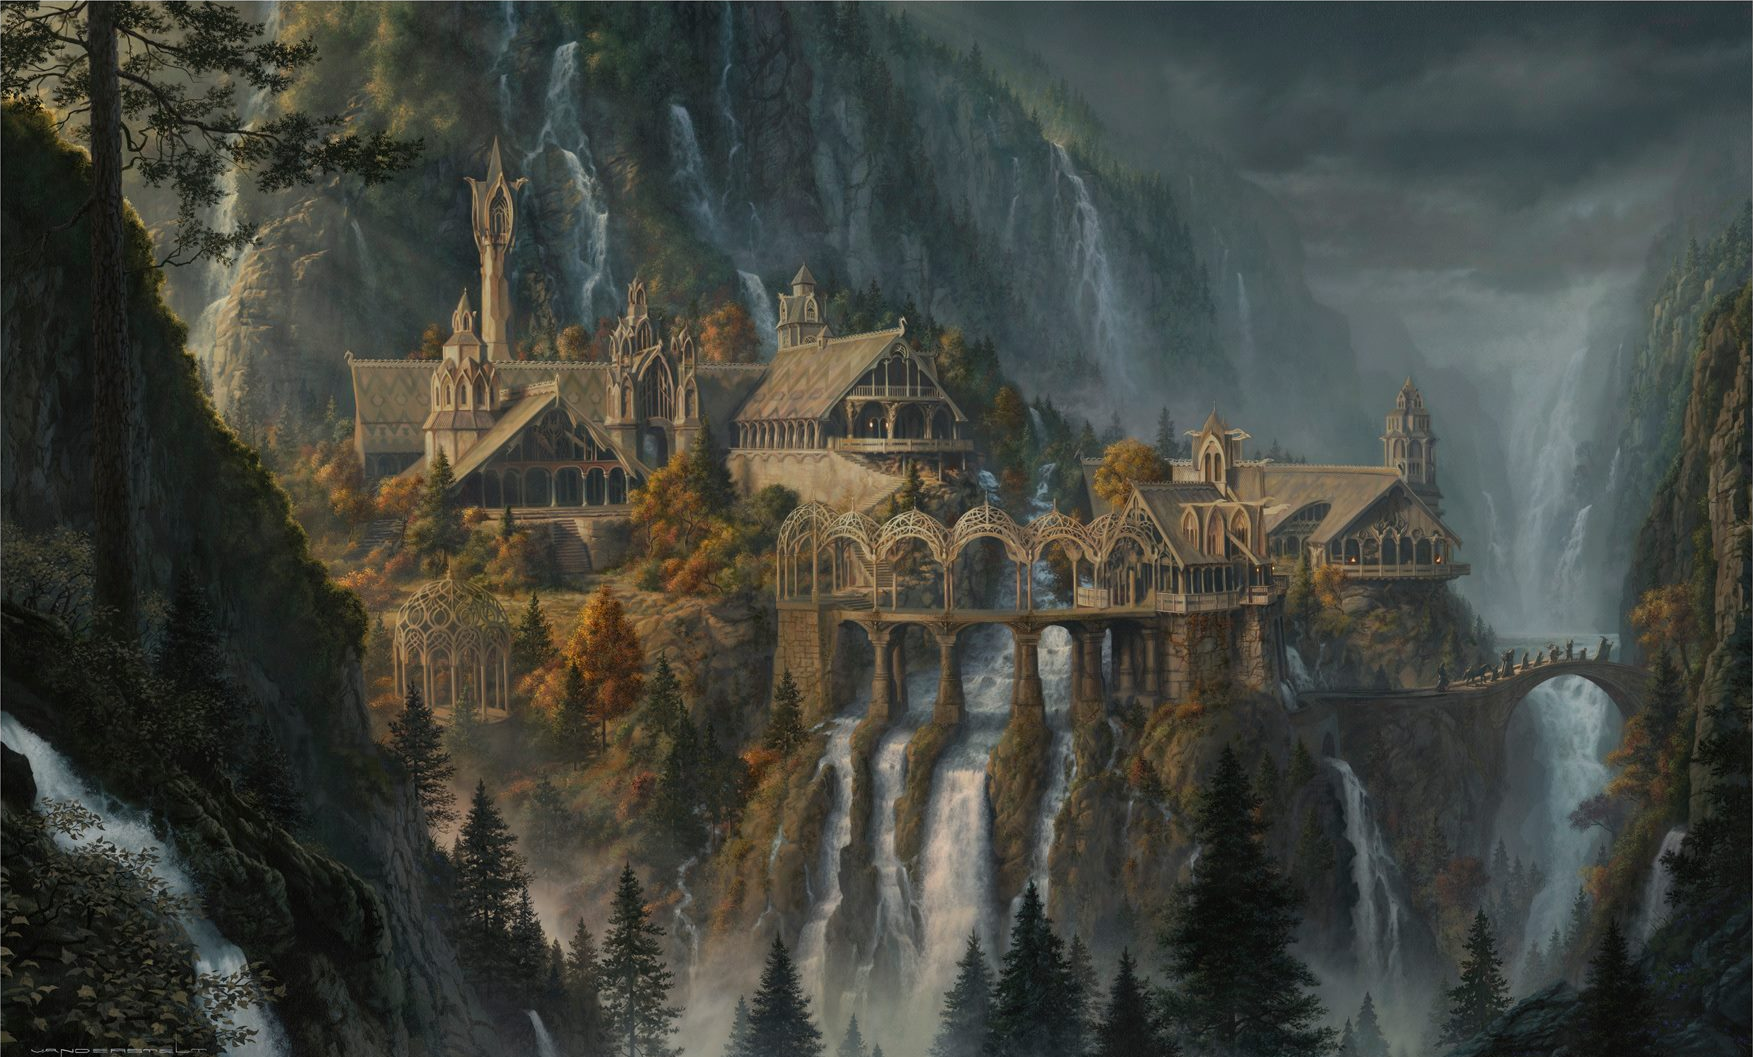 The Lord Of The Rings Waterfall J R R Tolkien The Lord Of The Rings Rivendell Artwork Rivendell Fant 1753x1057